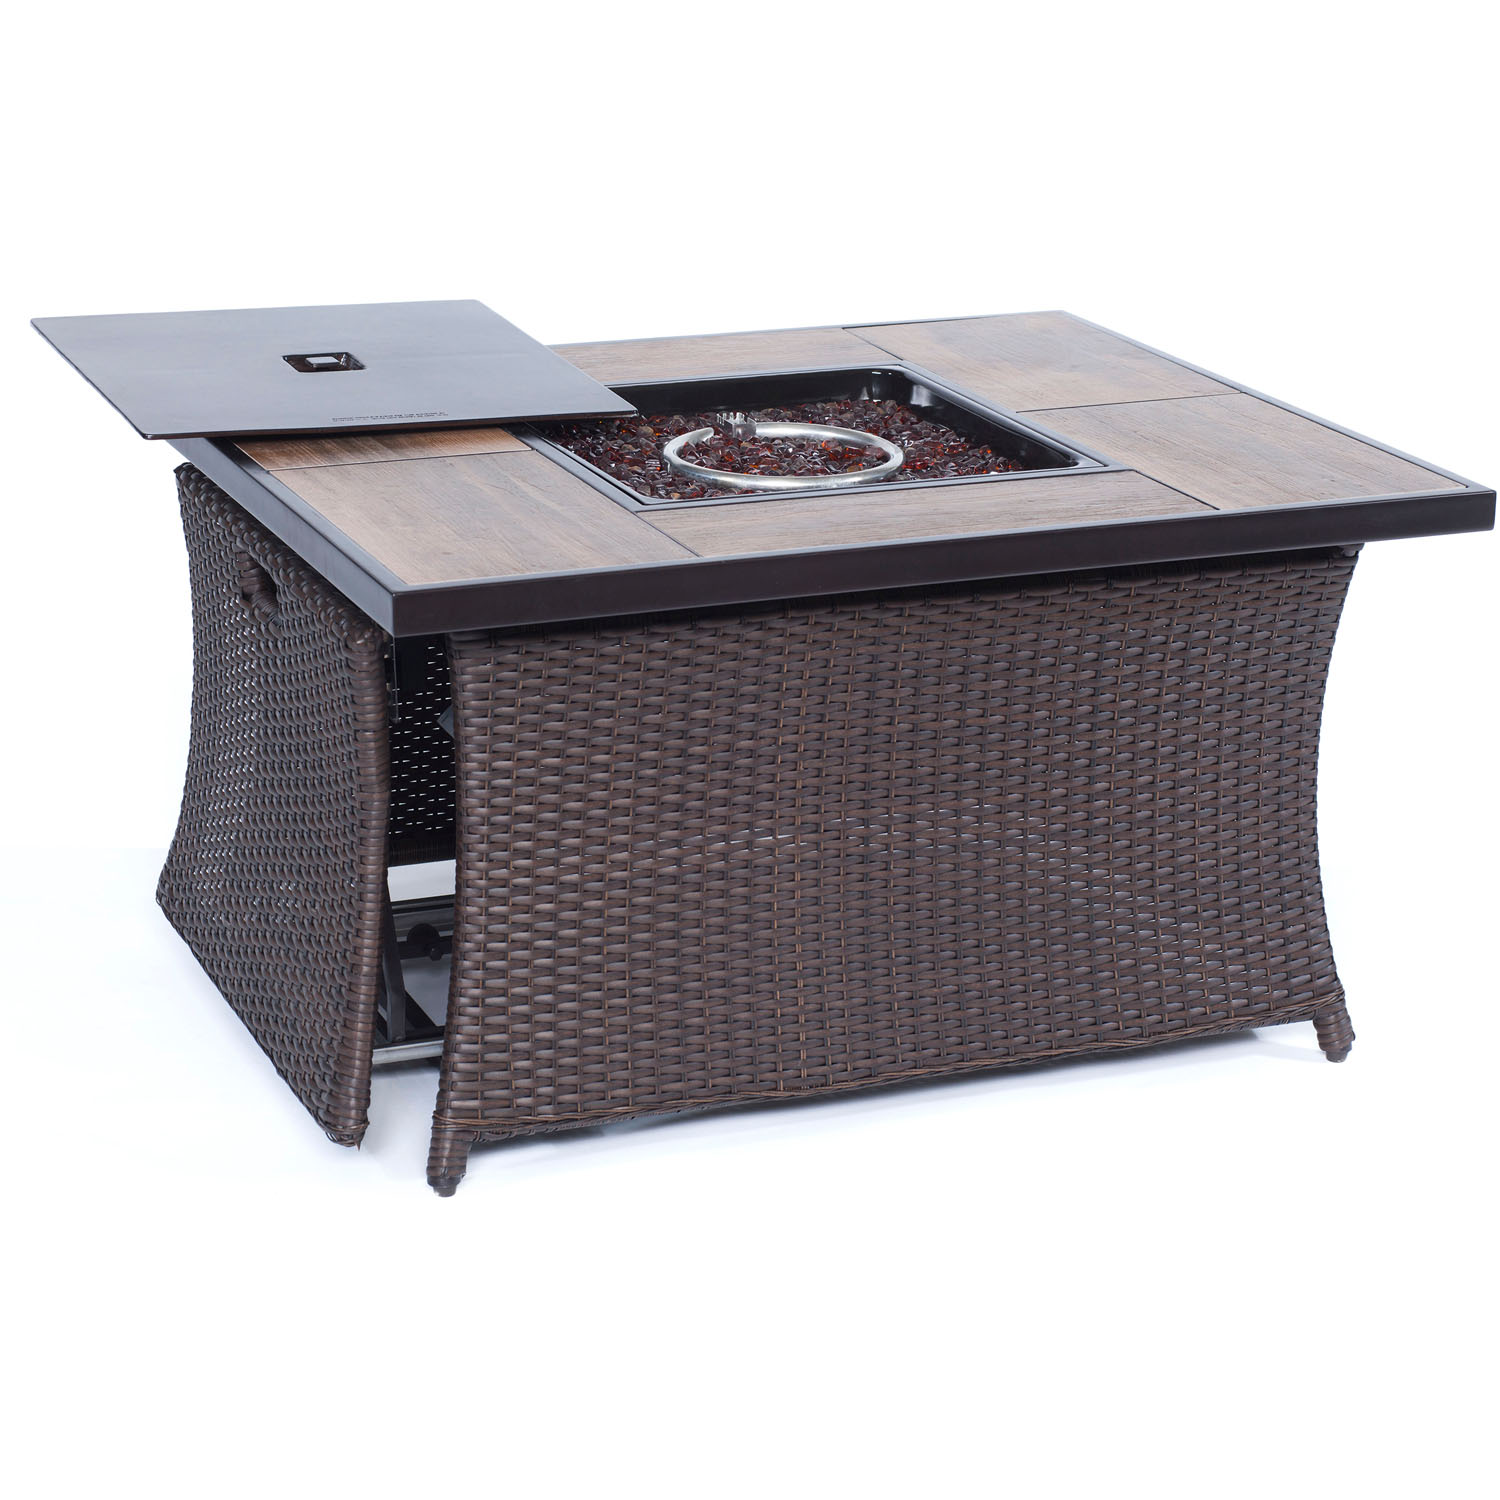 Hanover Metropolitan 3-Piece Woven Fire Pit Lounge Set with Glazed Faux-Wood Tile Top - image 5 of 7